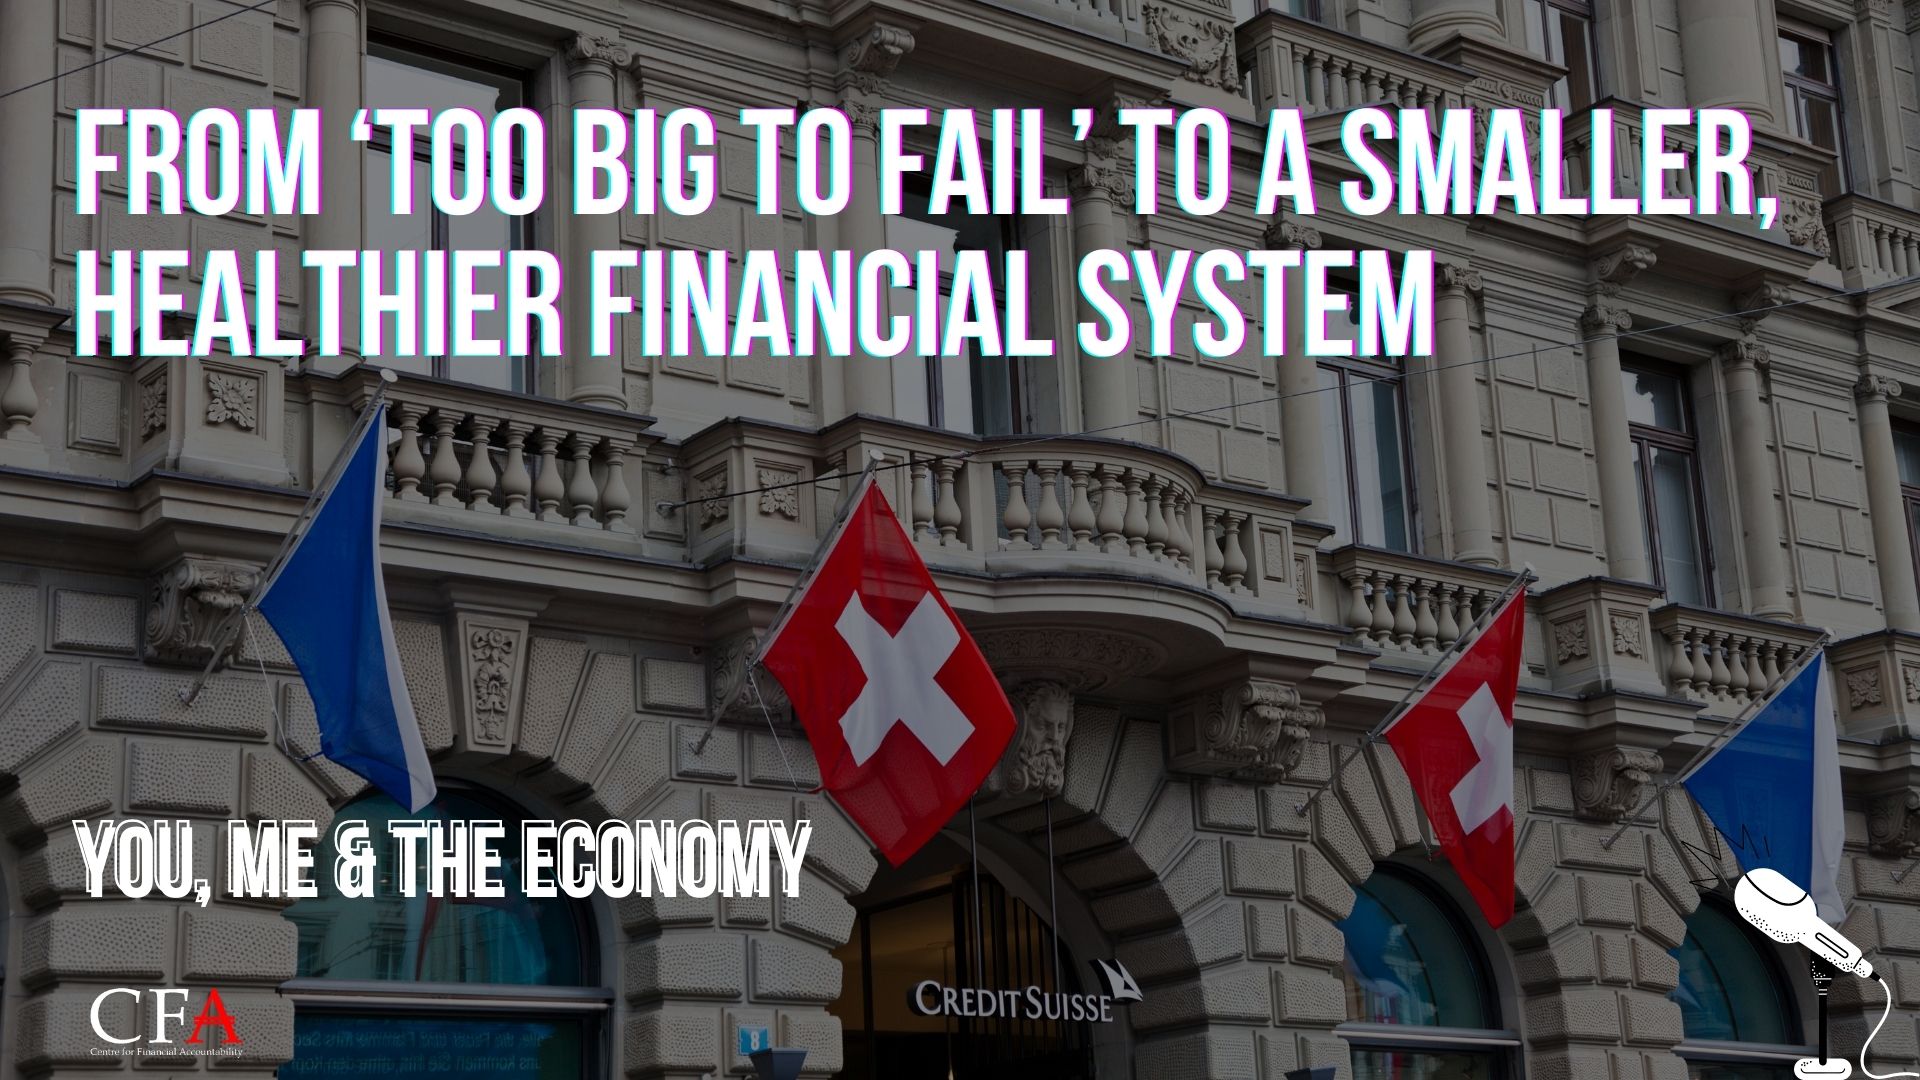 From ‘Too Big to Fail’ to a smaller, healthier financial system